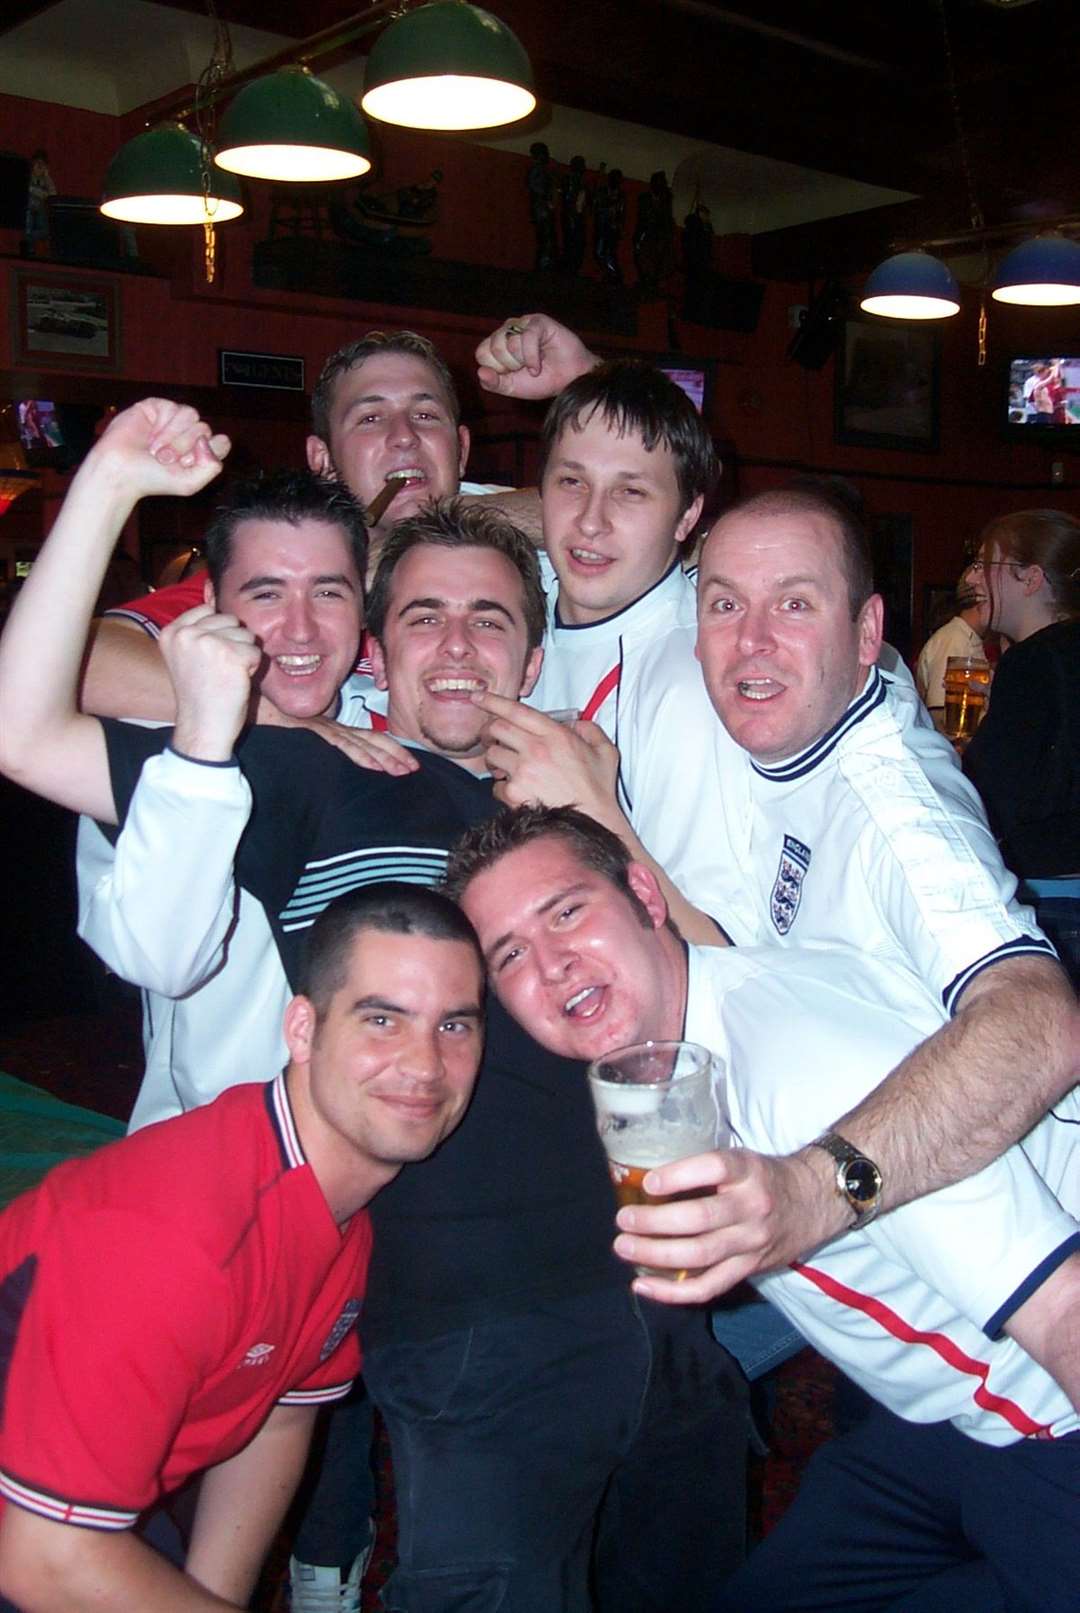 Fans in the Railway Hotel, Dartford, celebrate after England's 3-0 win over Denmark in the 2002 World Cup